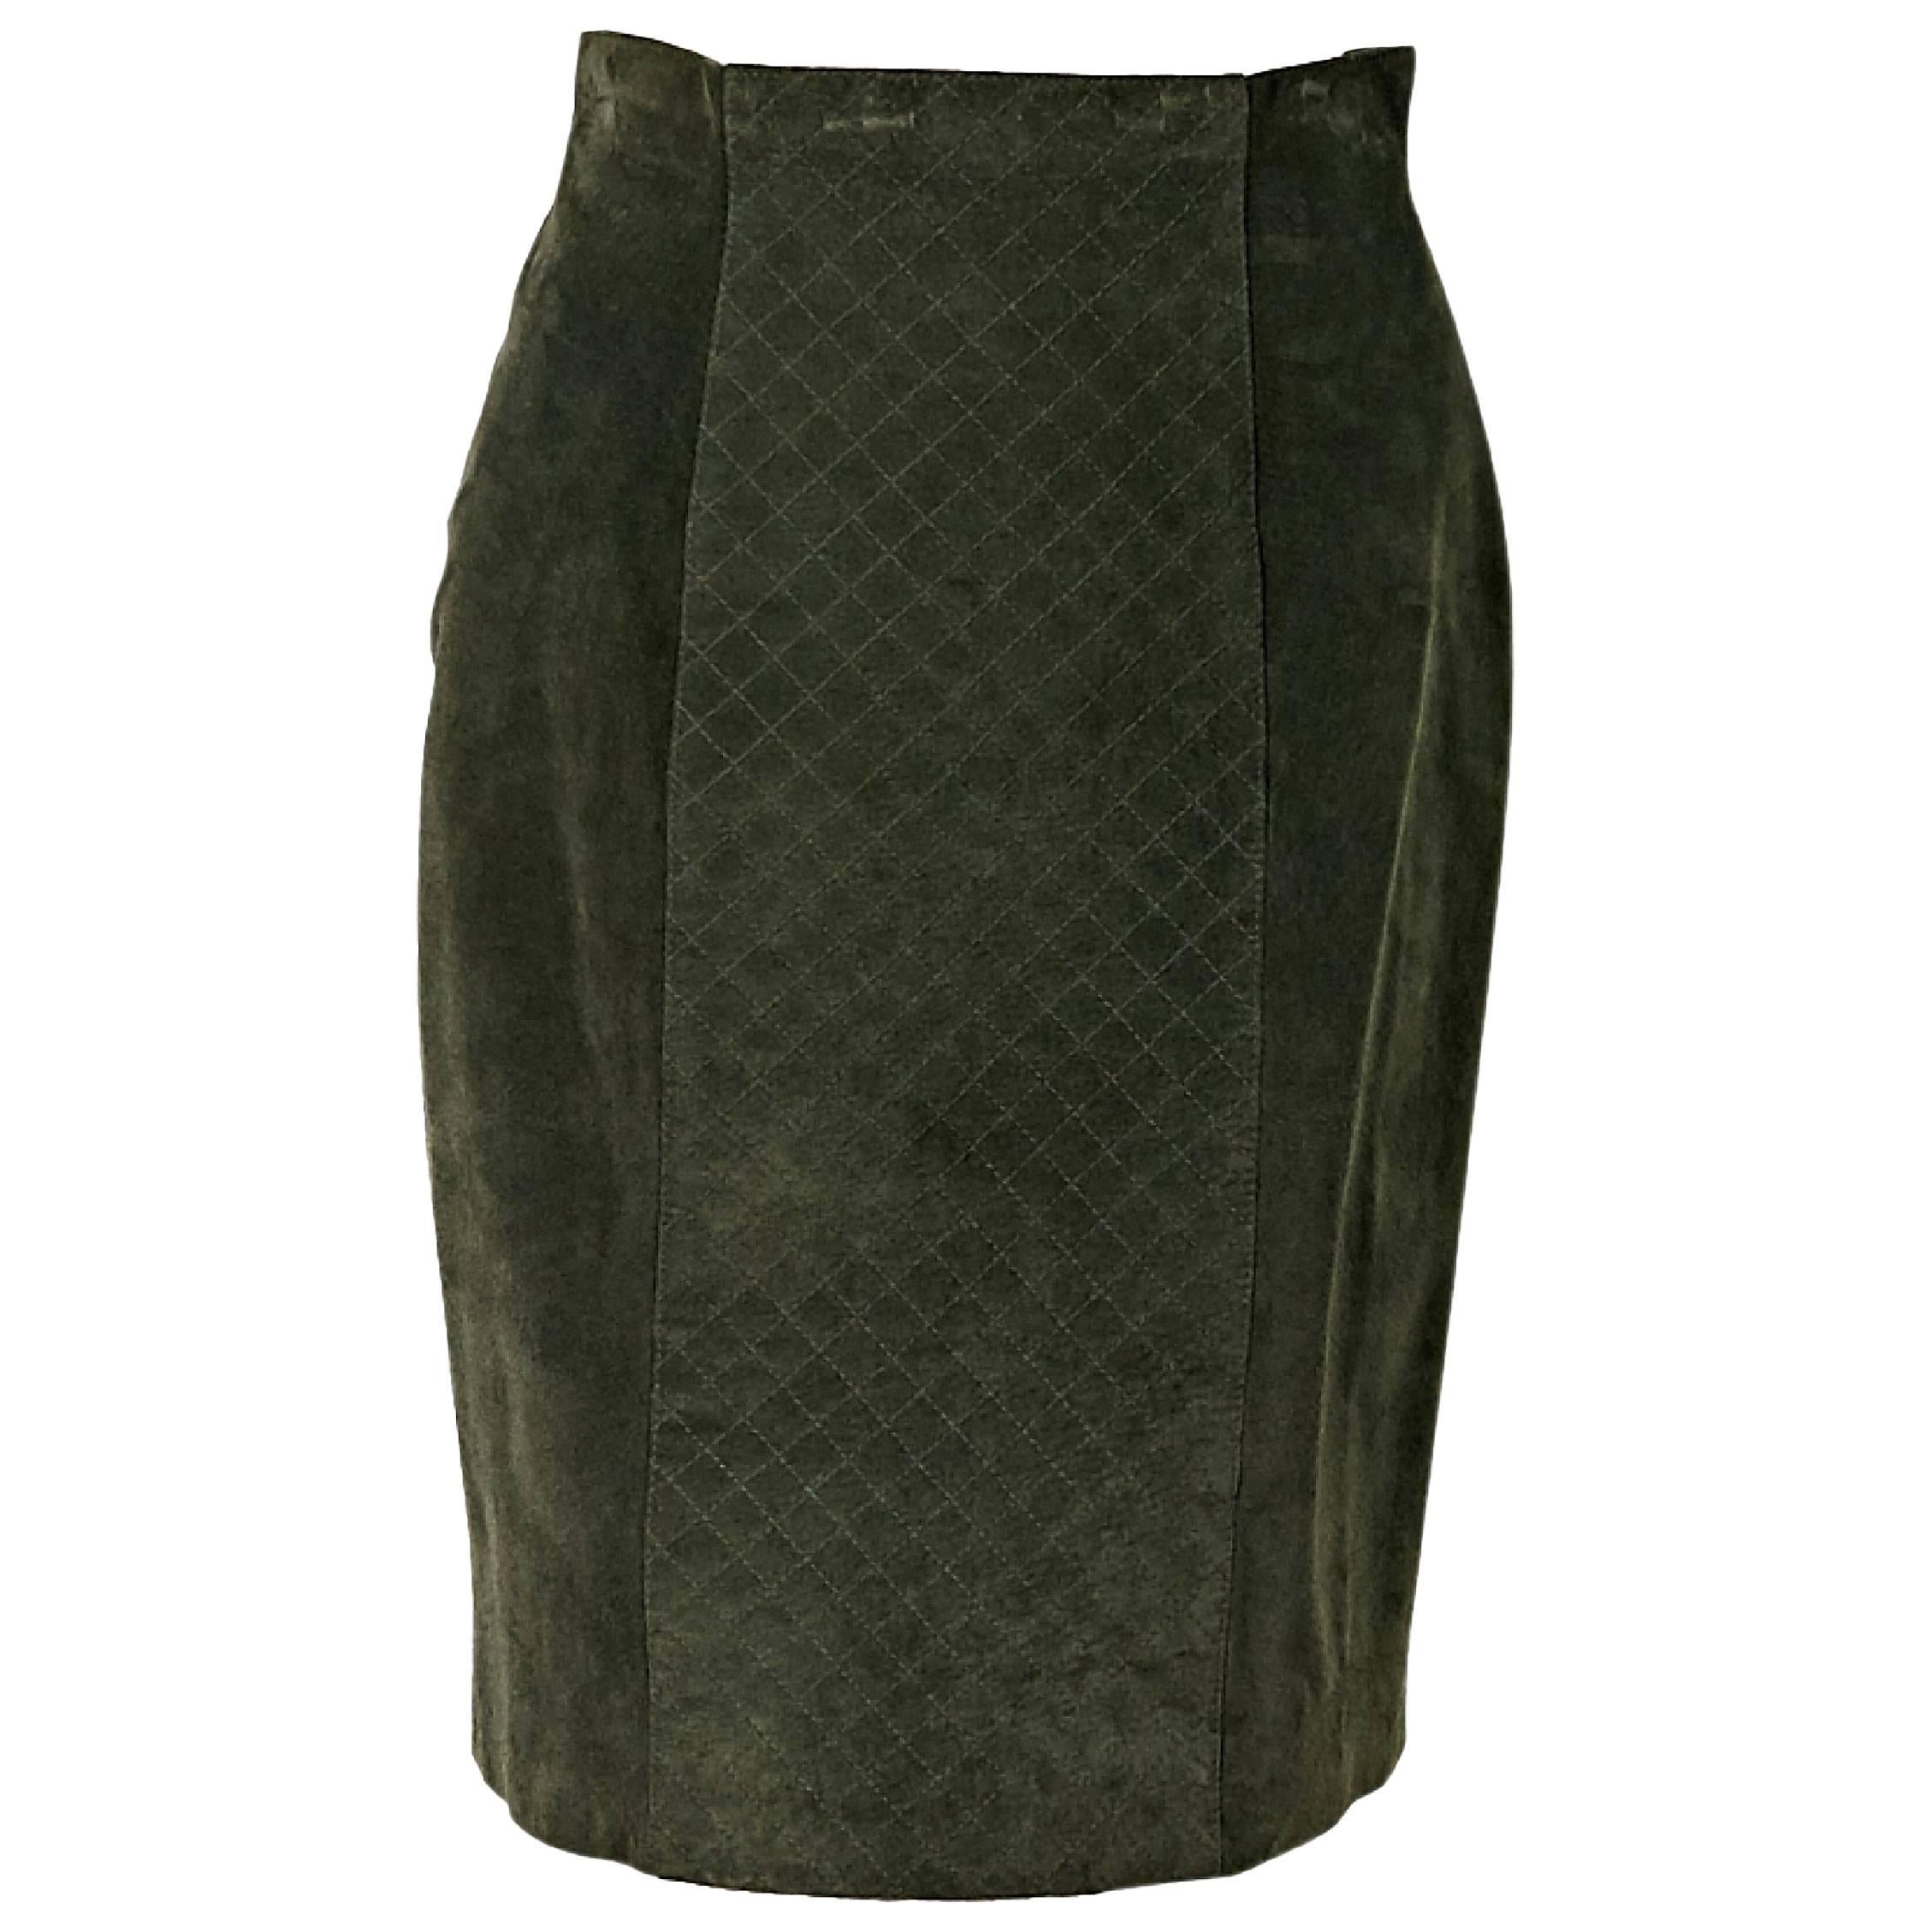 Olive Green Chanel Suede Pencil Skirt